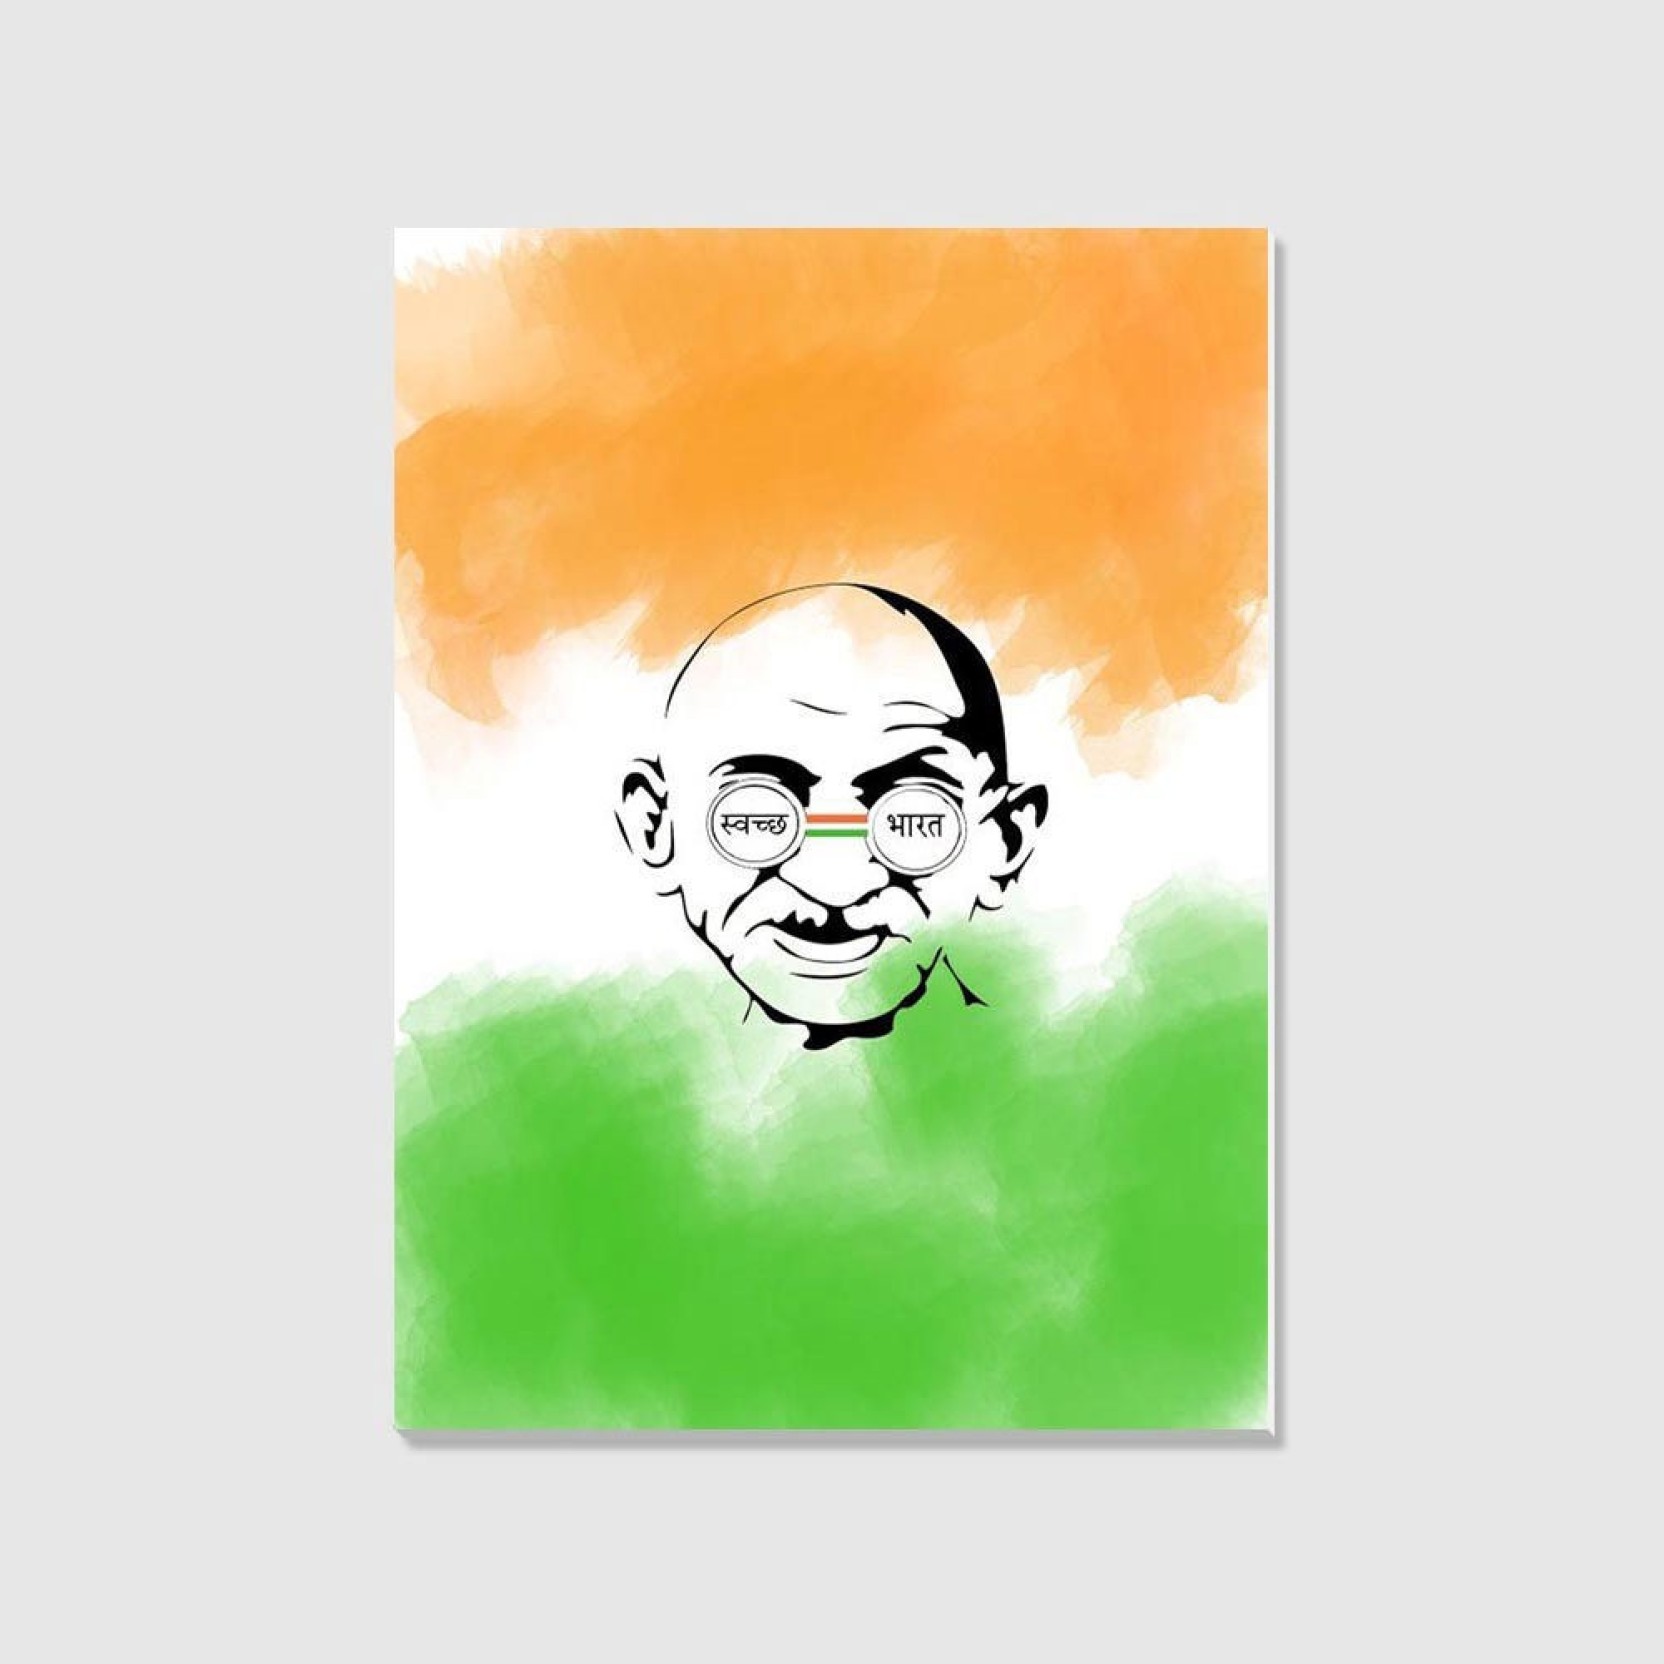 Swachh Bharat Abhiyan Stretched And Mounted Canvas - Drawing Swachata Abhiyan Posters , HD Wallpaper & Backgrounds